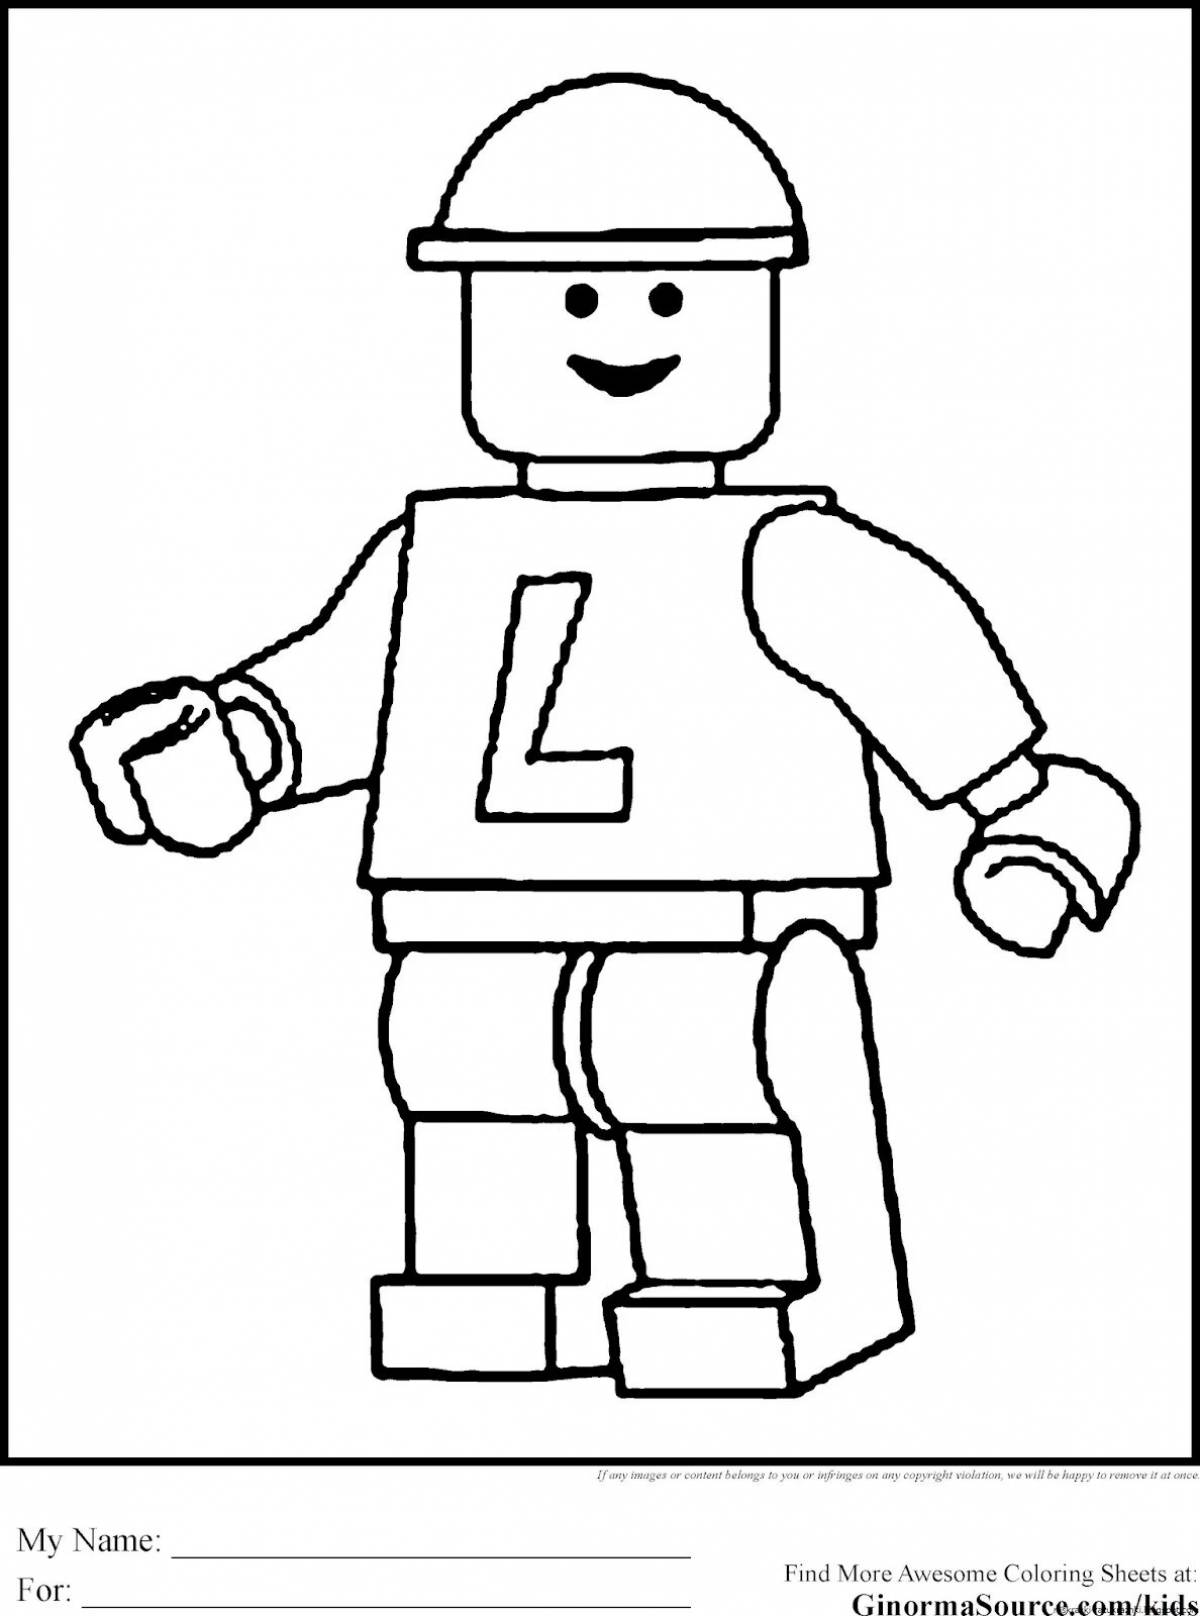 Lego figures for kids #20